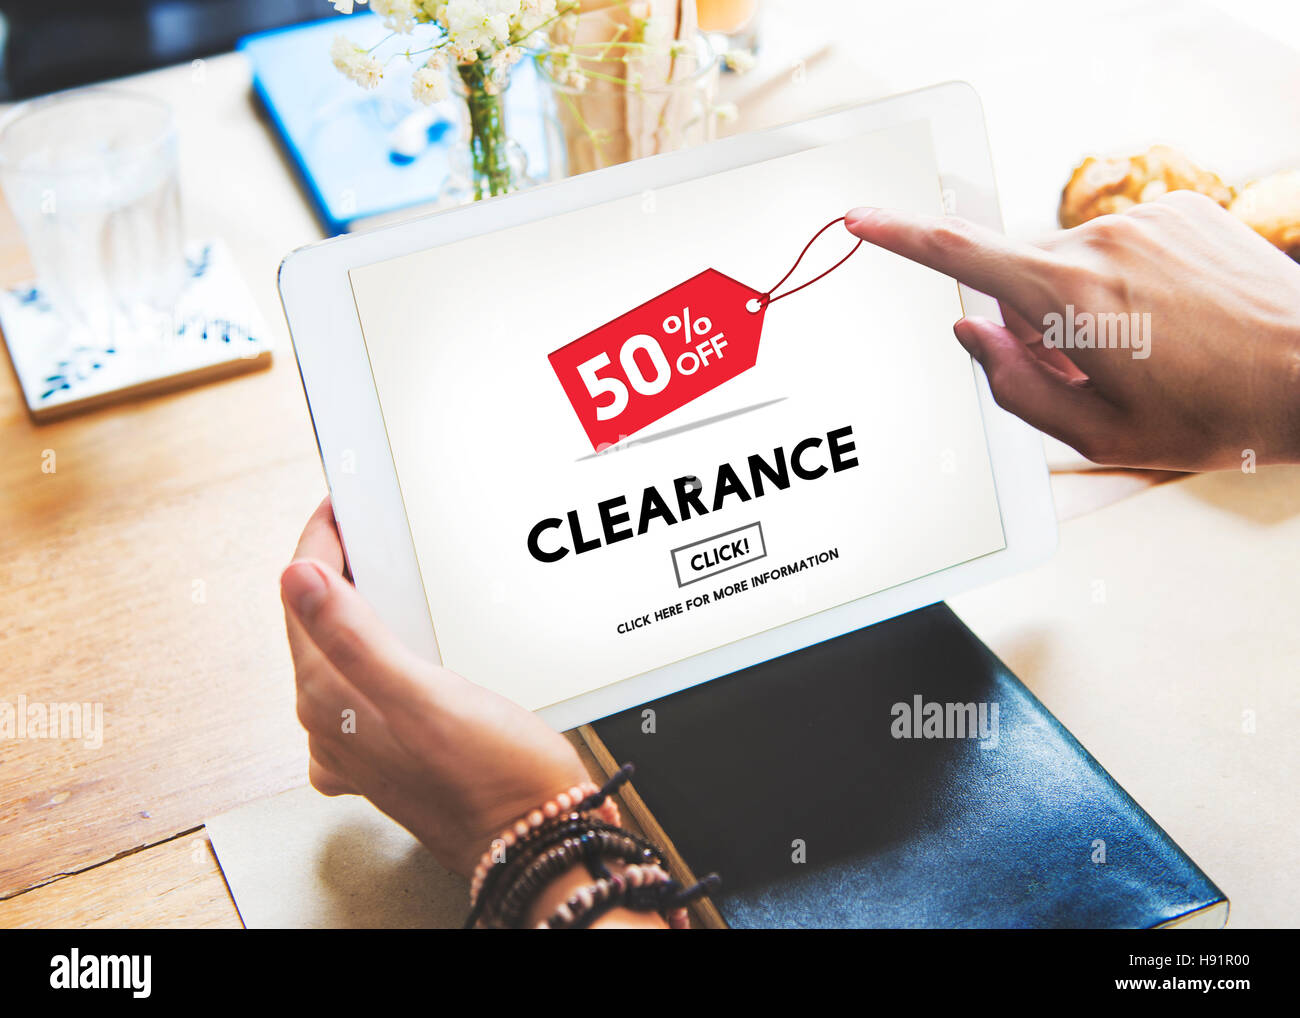 Clearance Promotion Discount Consumer Shopping Concept Stock Photo